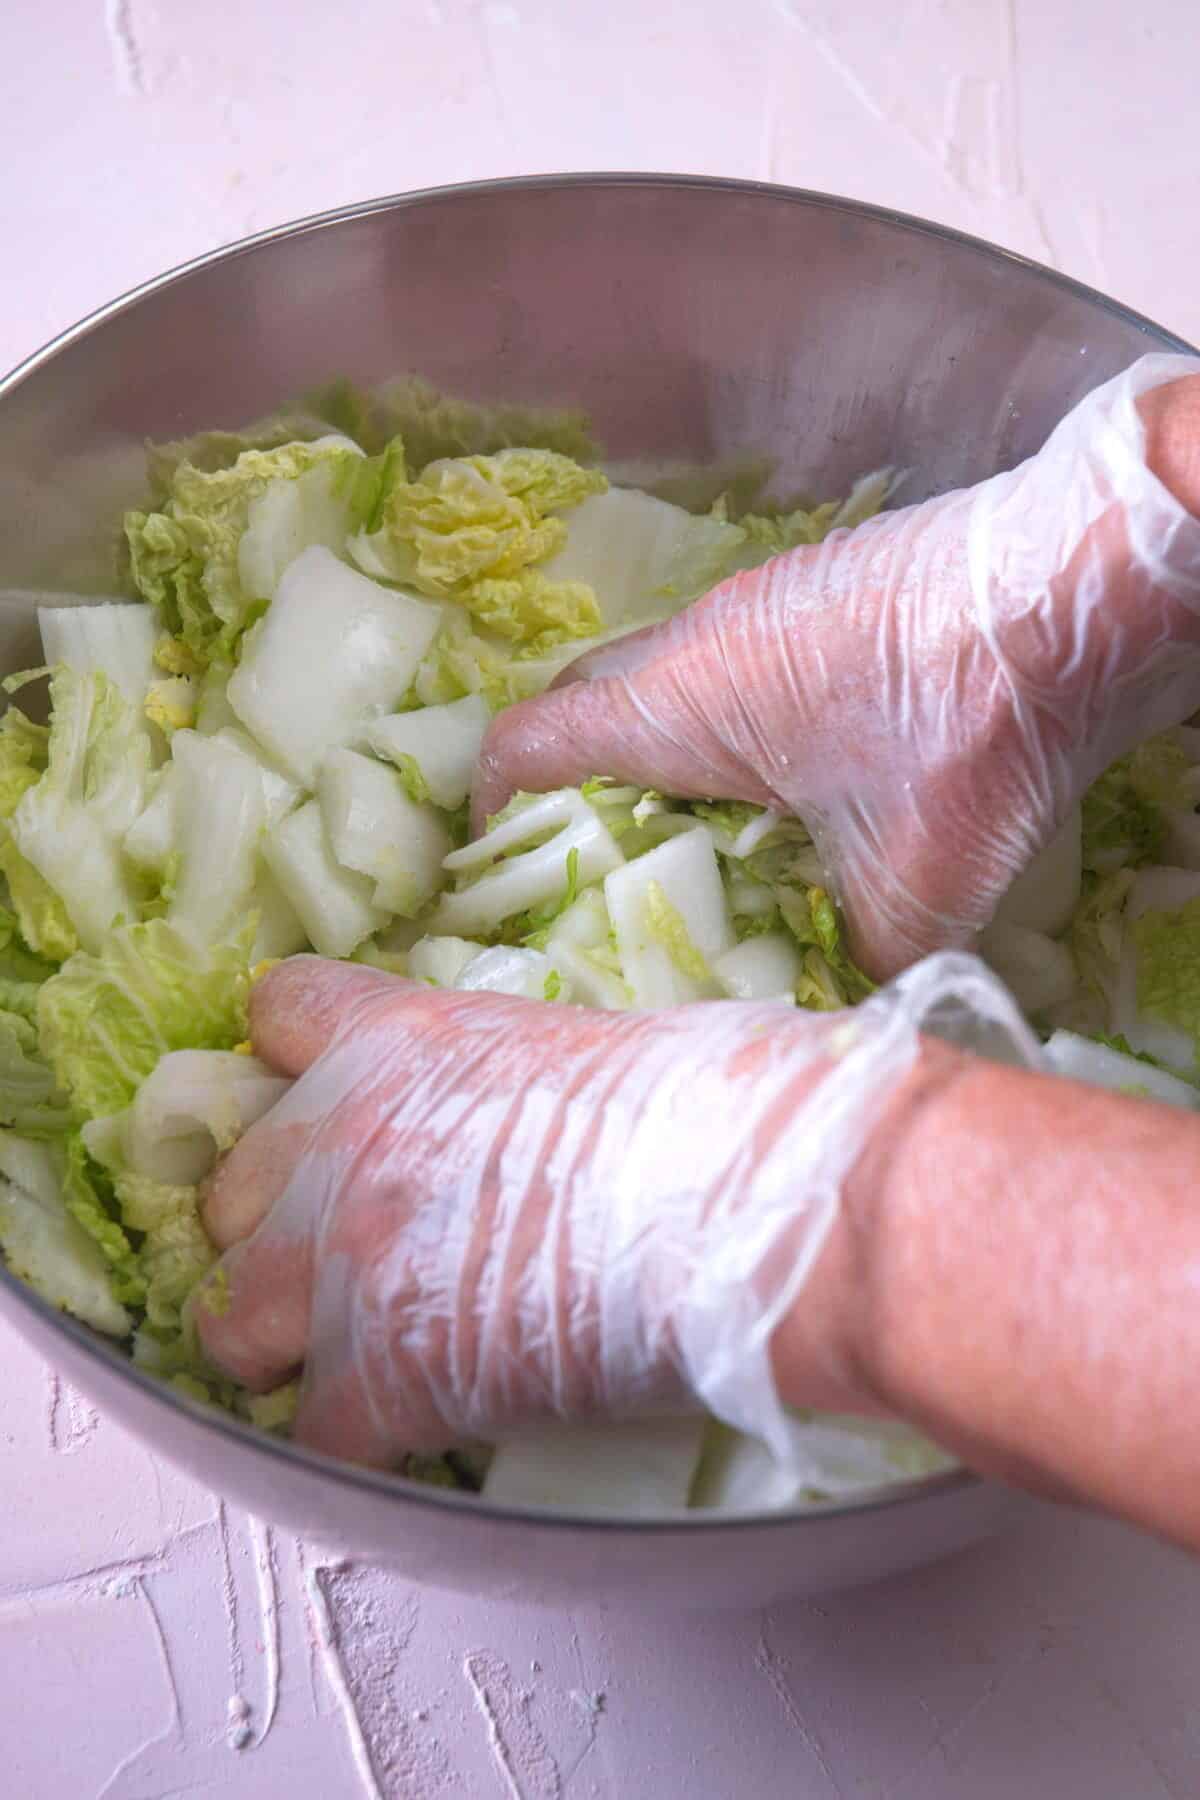 Chopped Napa cabbage in a large steel bowl.